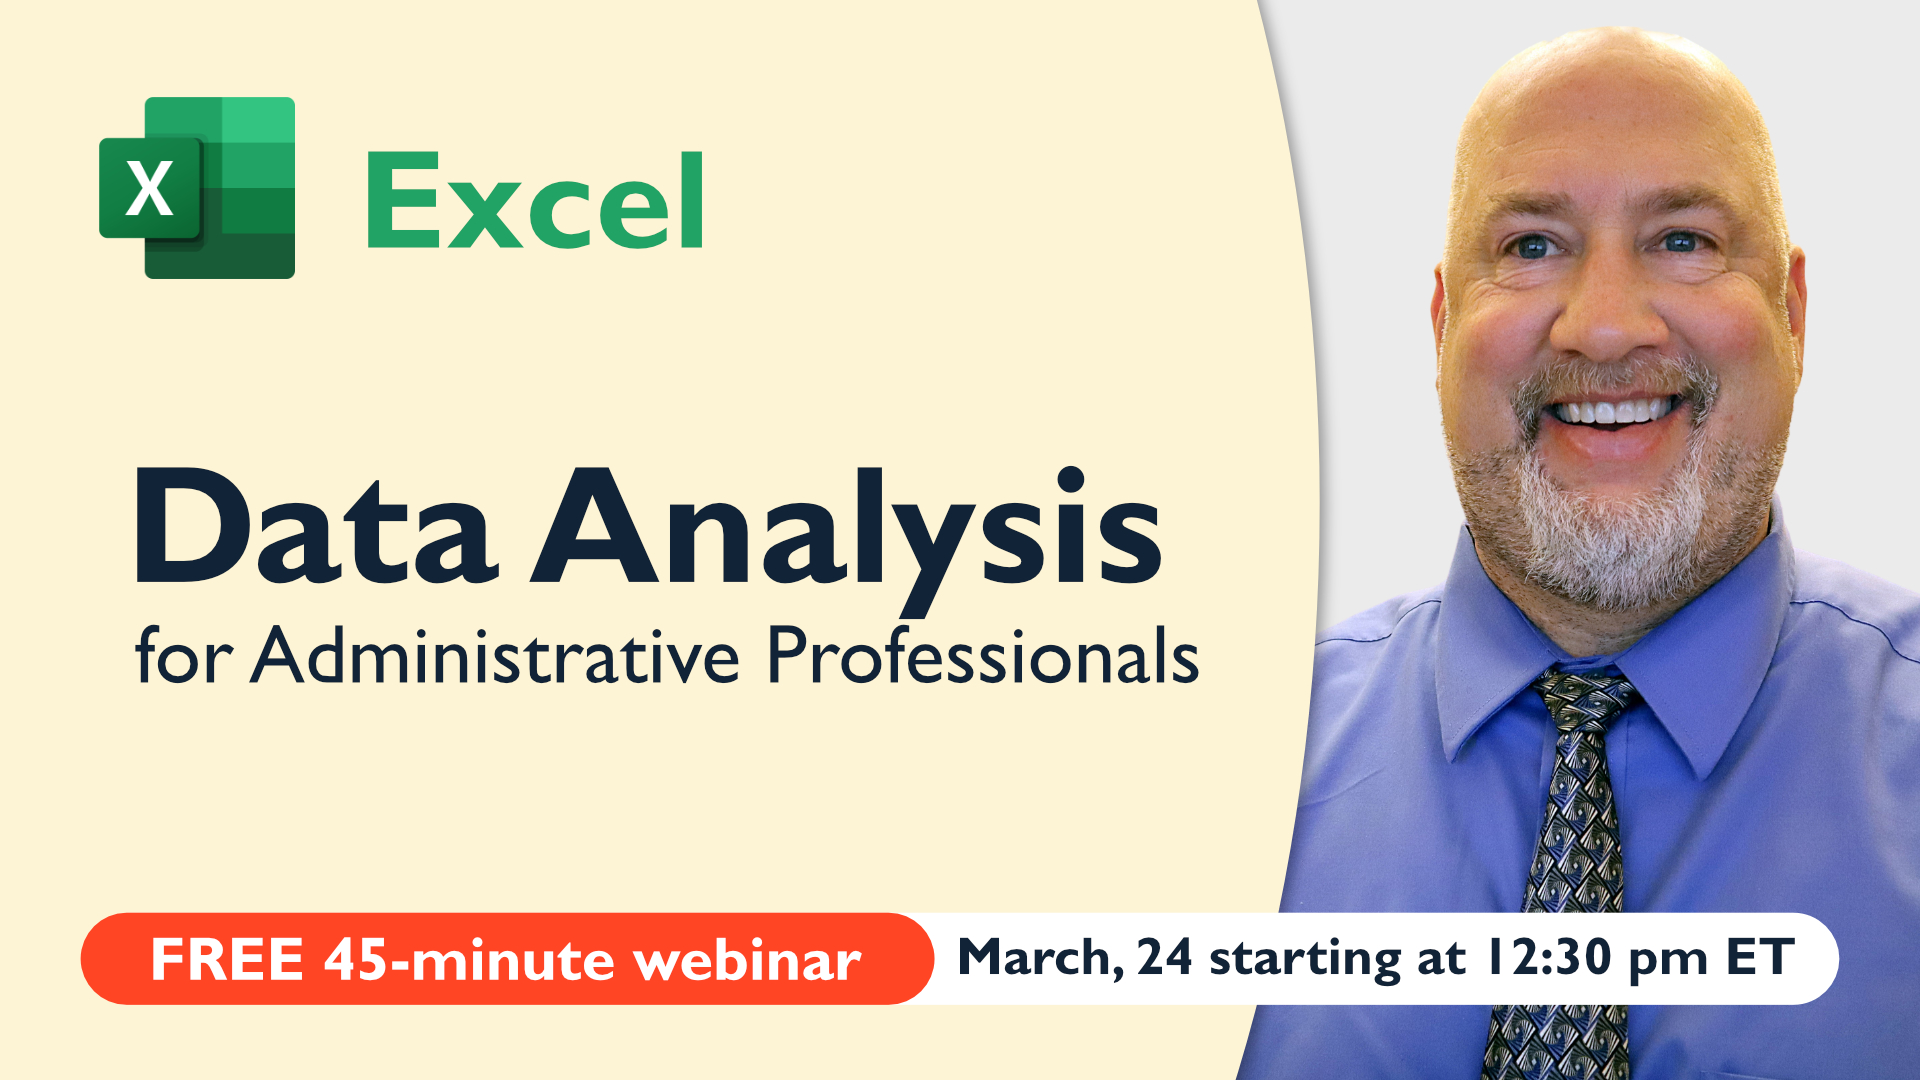 March 24, 2022 - FREE Excel Webinar for Administrative Professionals